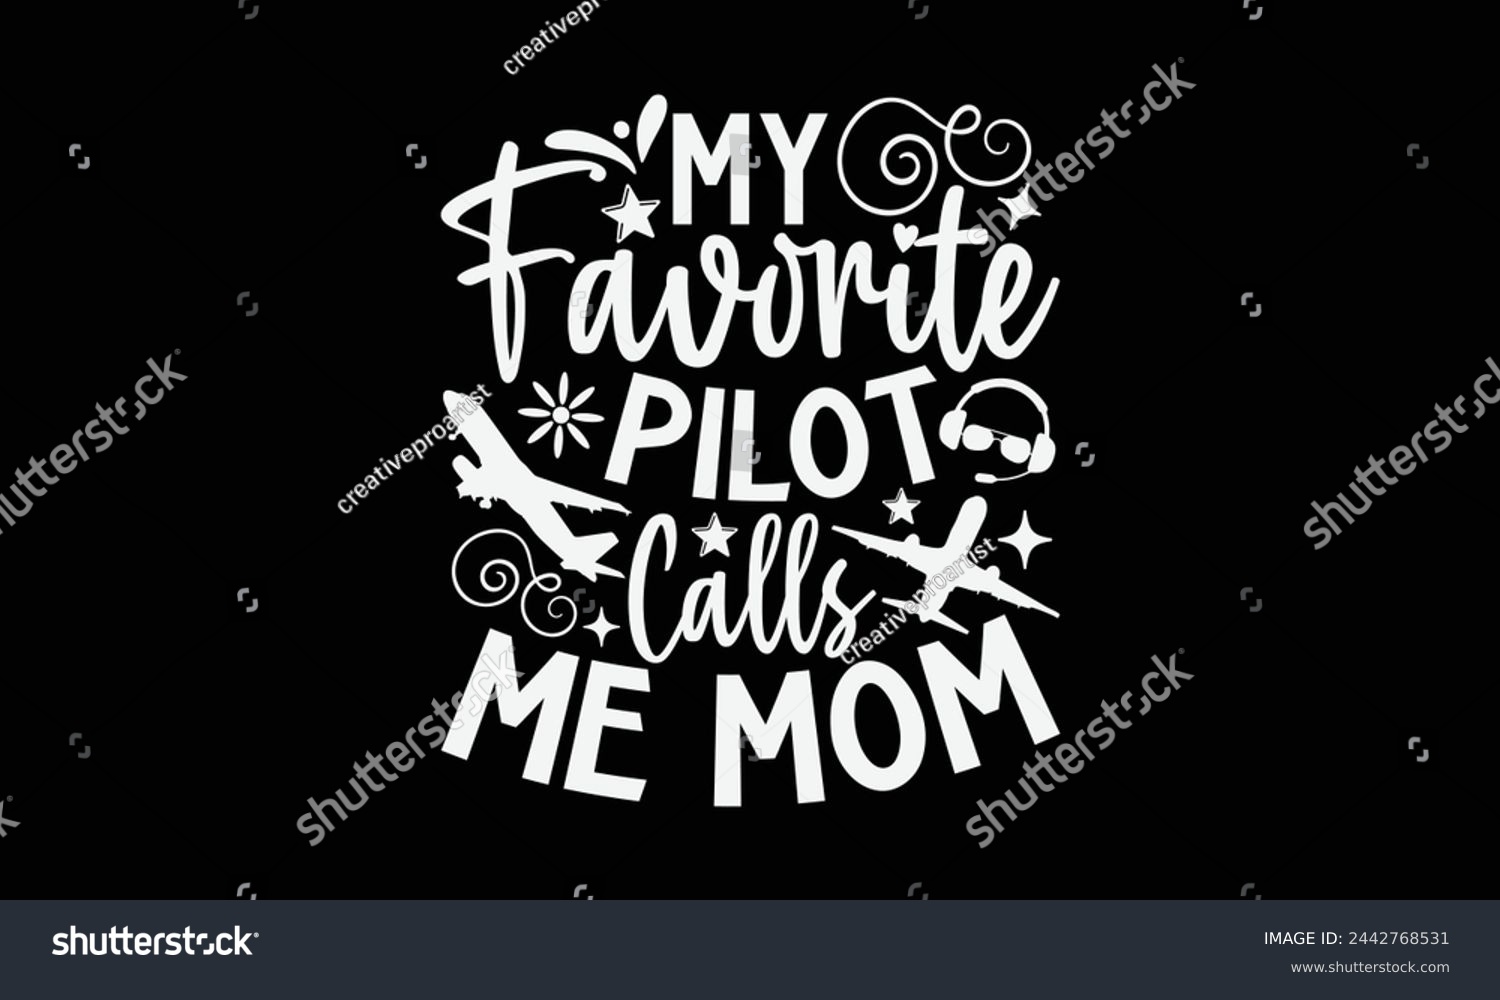 SVG of My Favorite Pilot Calls Me Mom- Pilot t- shirt design, Hand drawn lettering phrase for Cutting Machine, Silhouette Cameo, Cricut, Vector illustration Template, Isolated on black background. svg